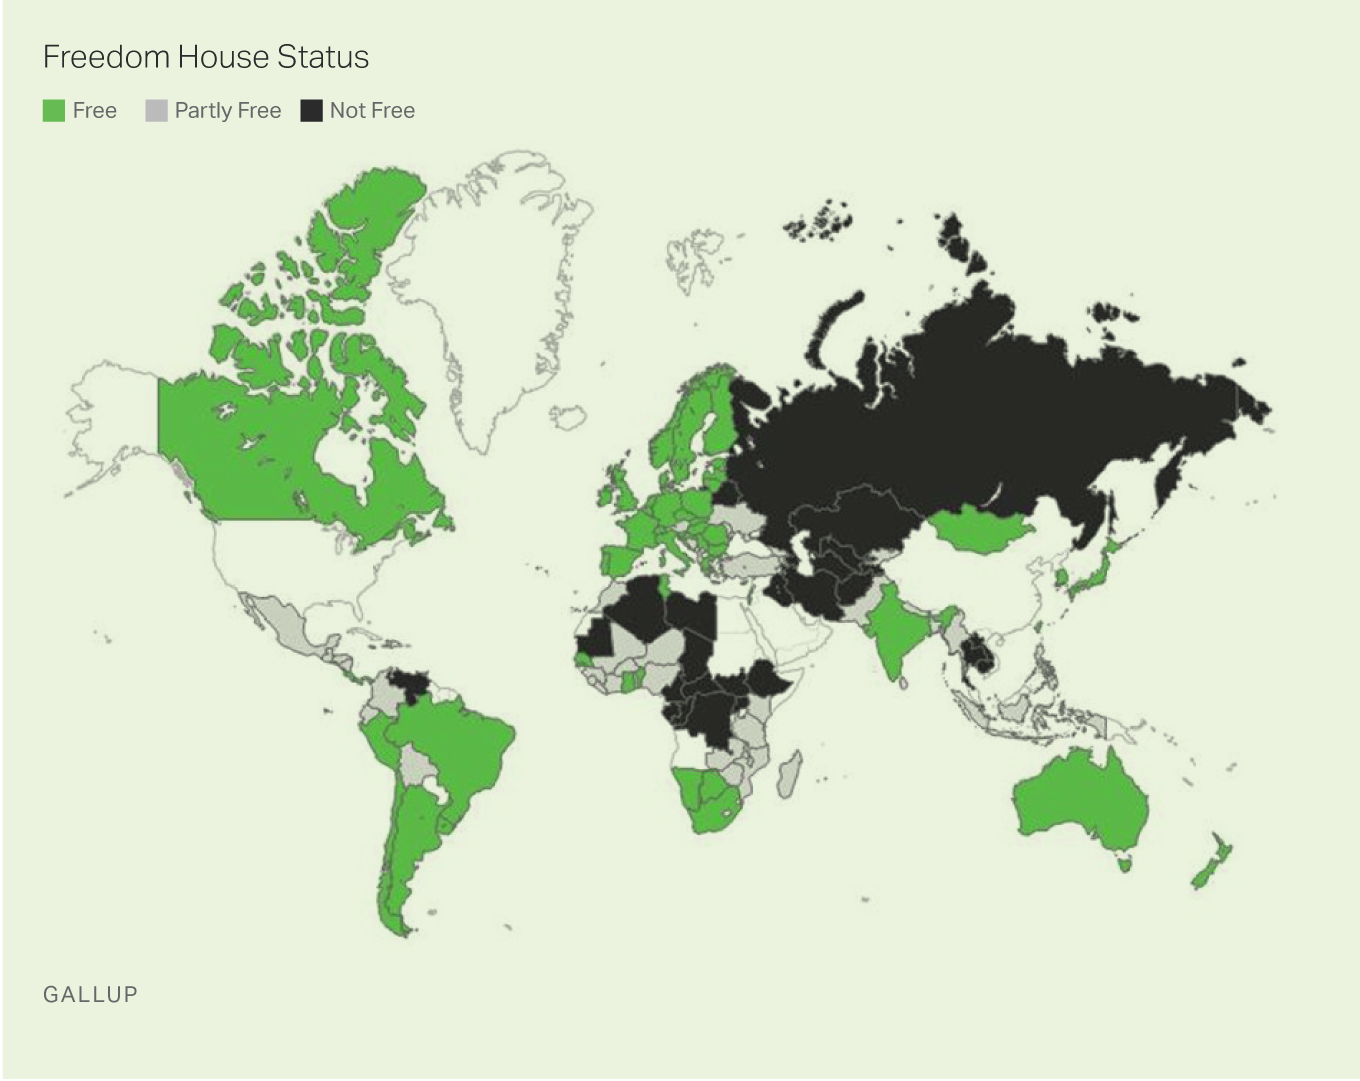 Map of Nations by Freedom House Status 